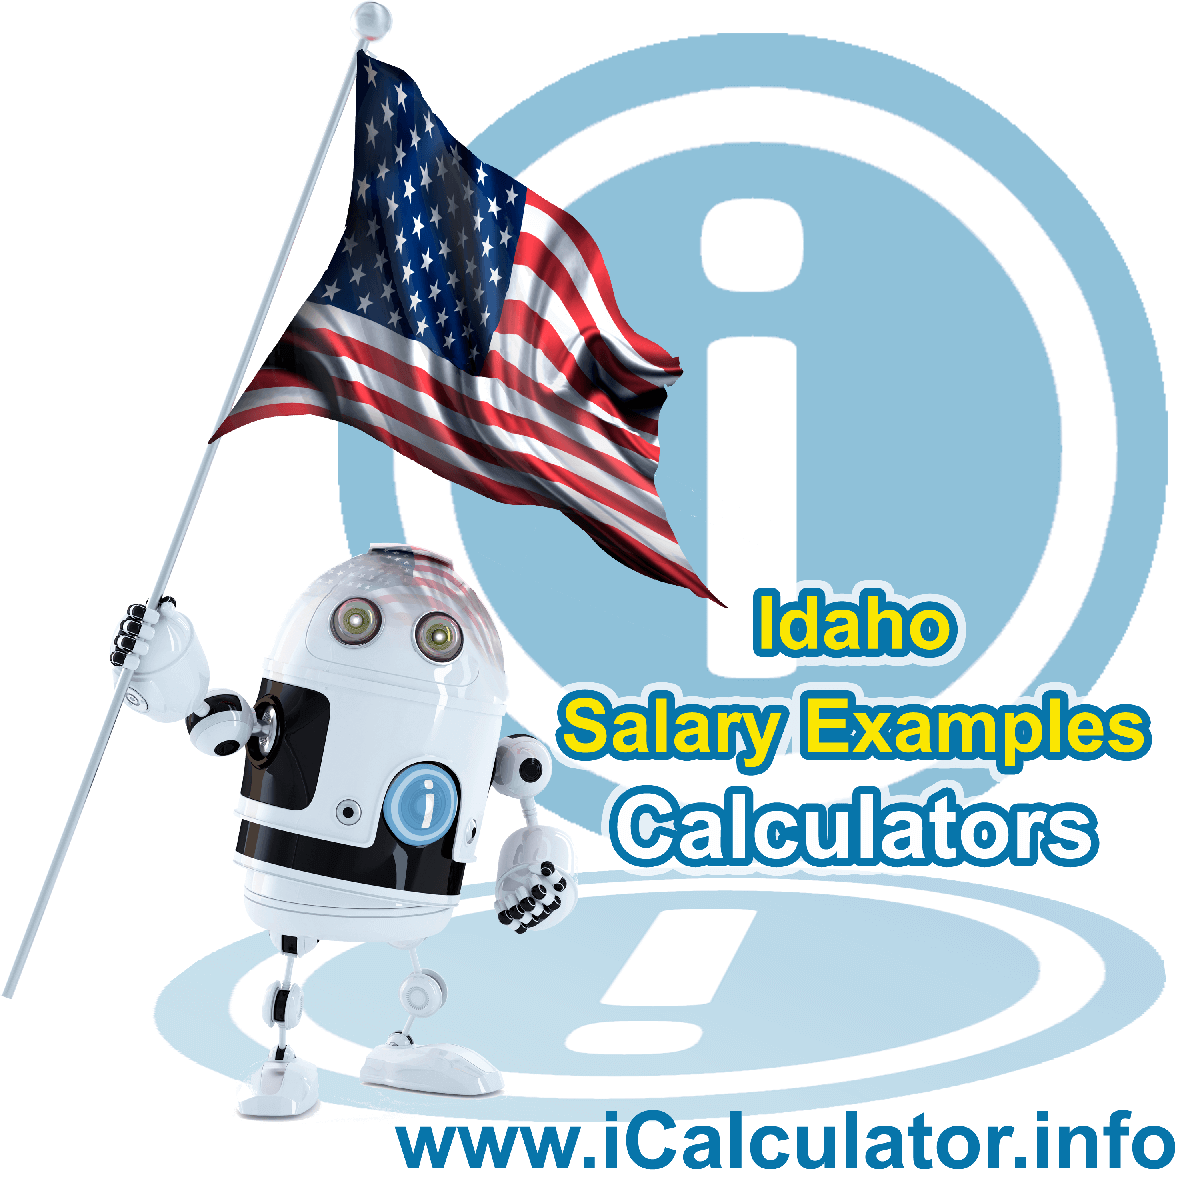 Idaho Salary Example for $110,000.00 in 2022 | iCalculator™ | $110,000.00 salary example for employee and employer paying Idaho State tincome taxes. Detailed salary after tax calculation including Idaho State Tax, Federal State Tax, Medicare Deductions, Social Security, Capital Gains and other income tax and salary deductions complete with supporting Idaho state tax tables 